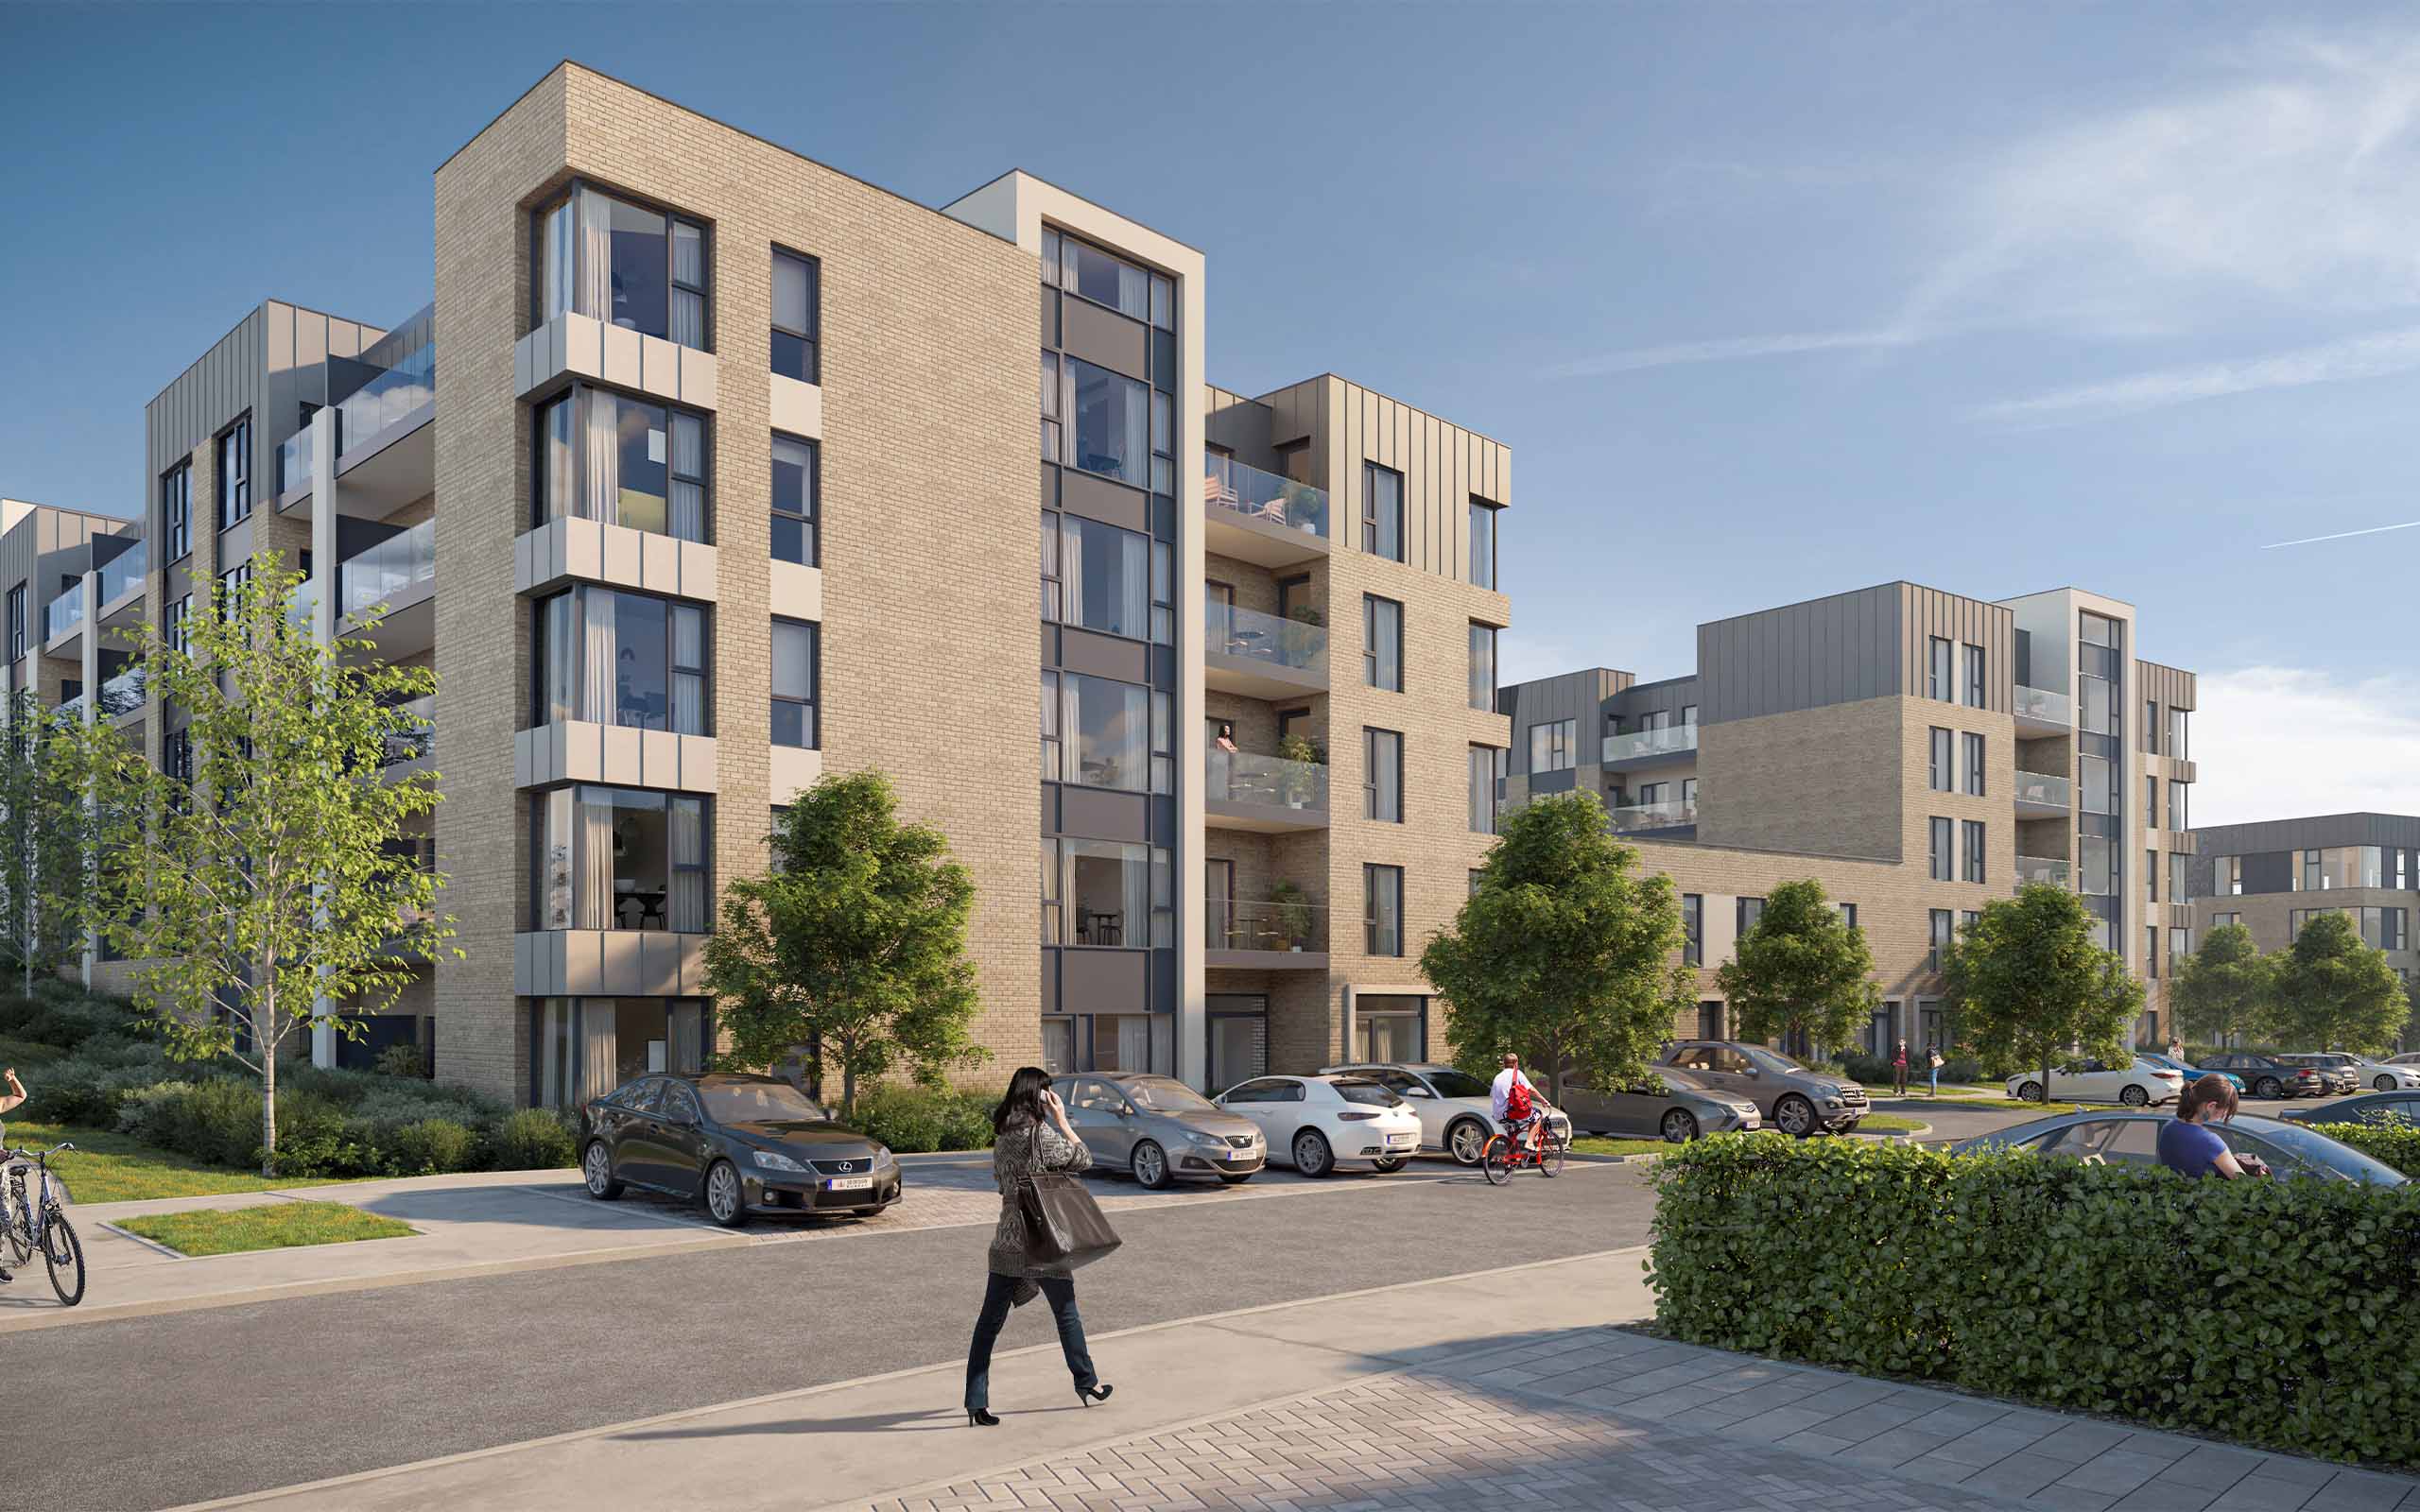 Architectural CGI of 329 Homes Approved in Ballycullen, Dublin 16.